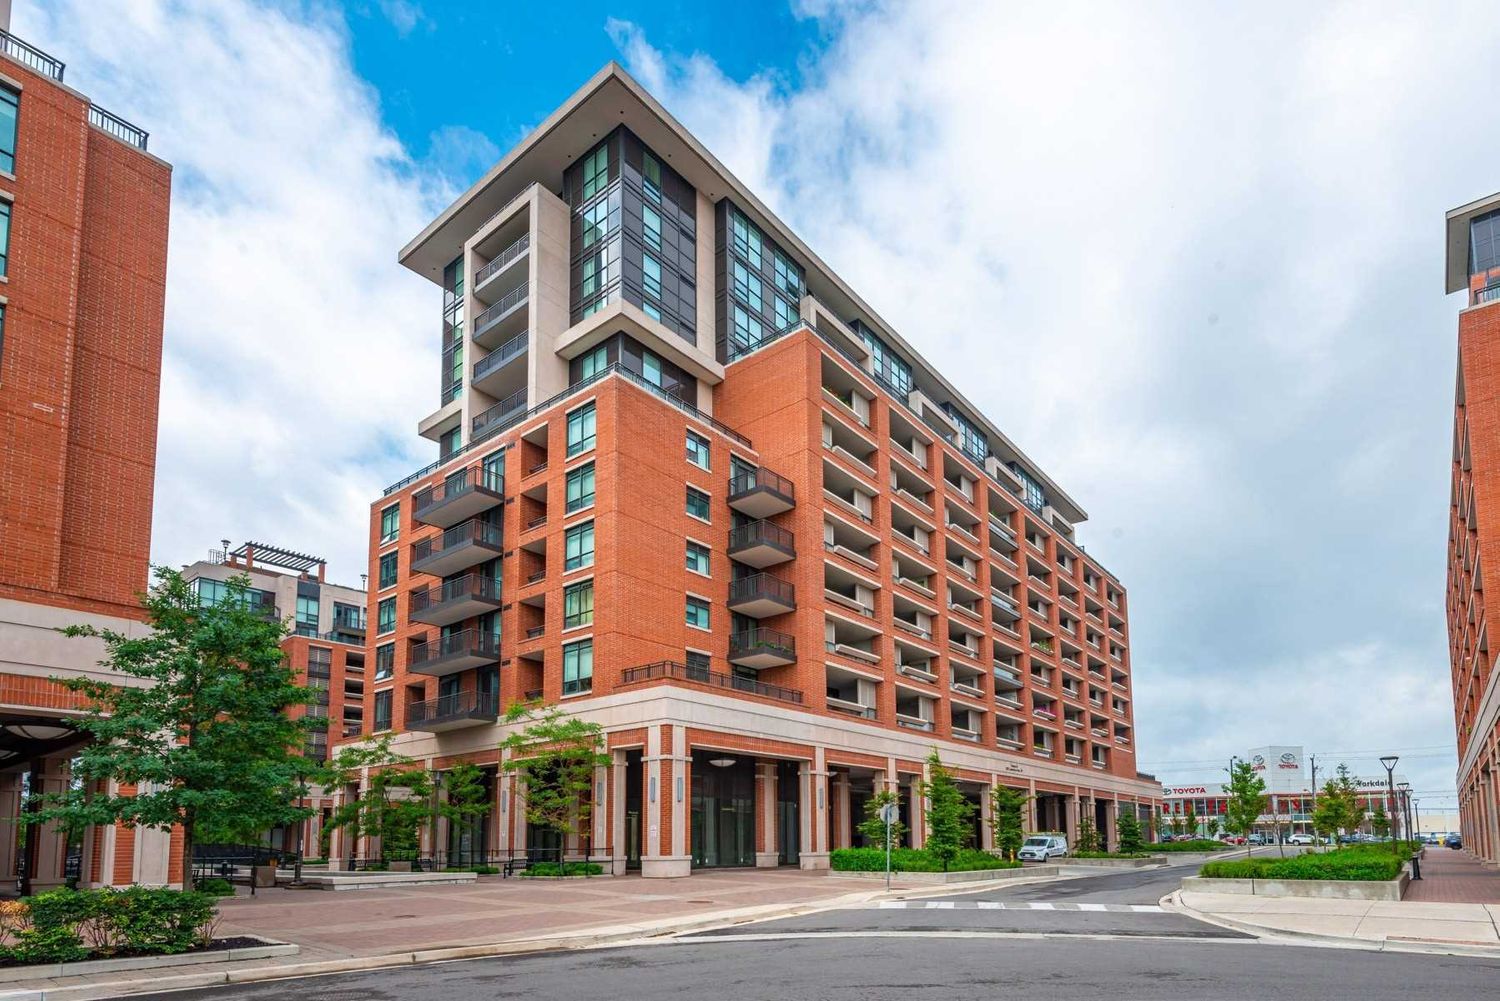 830 Lawrence Avenue W. Treviso II Condos is located in  North York, Toronto - image #1 of 3